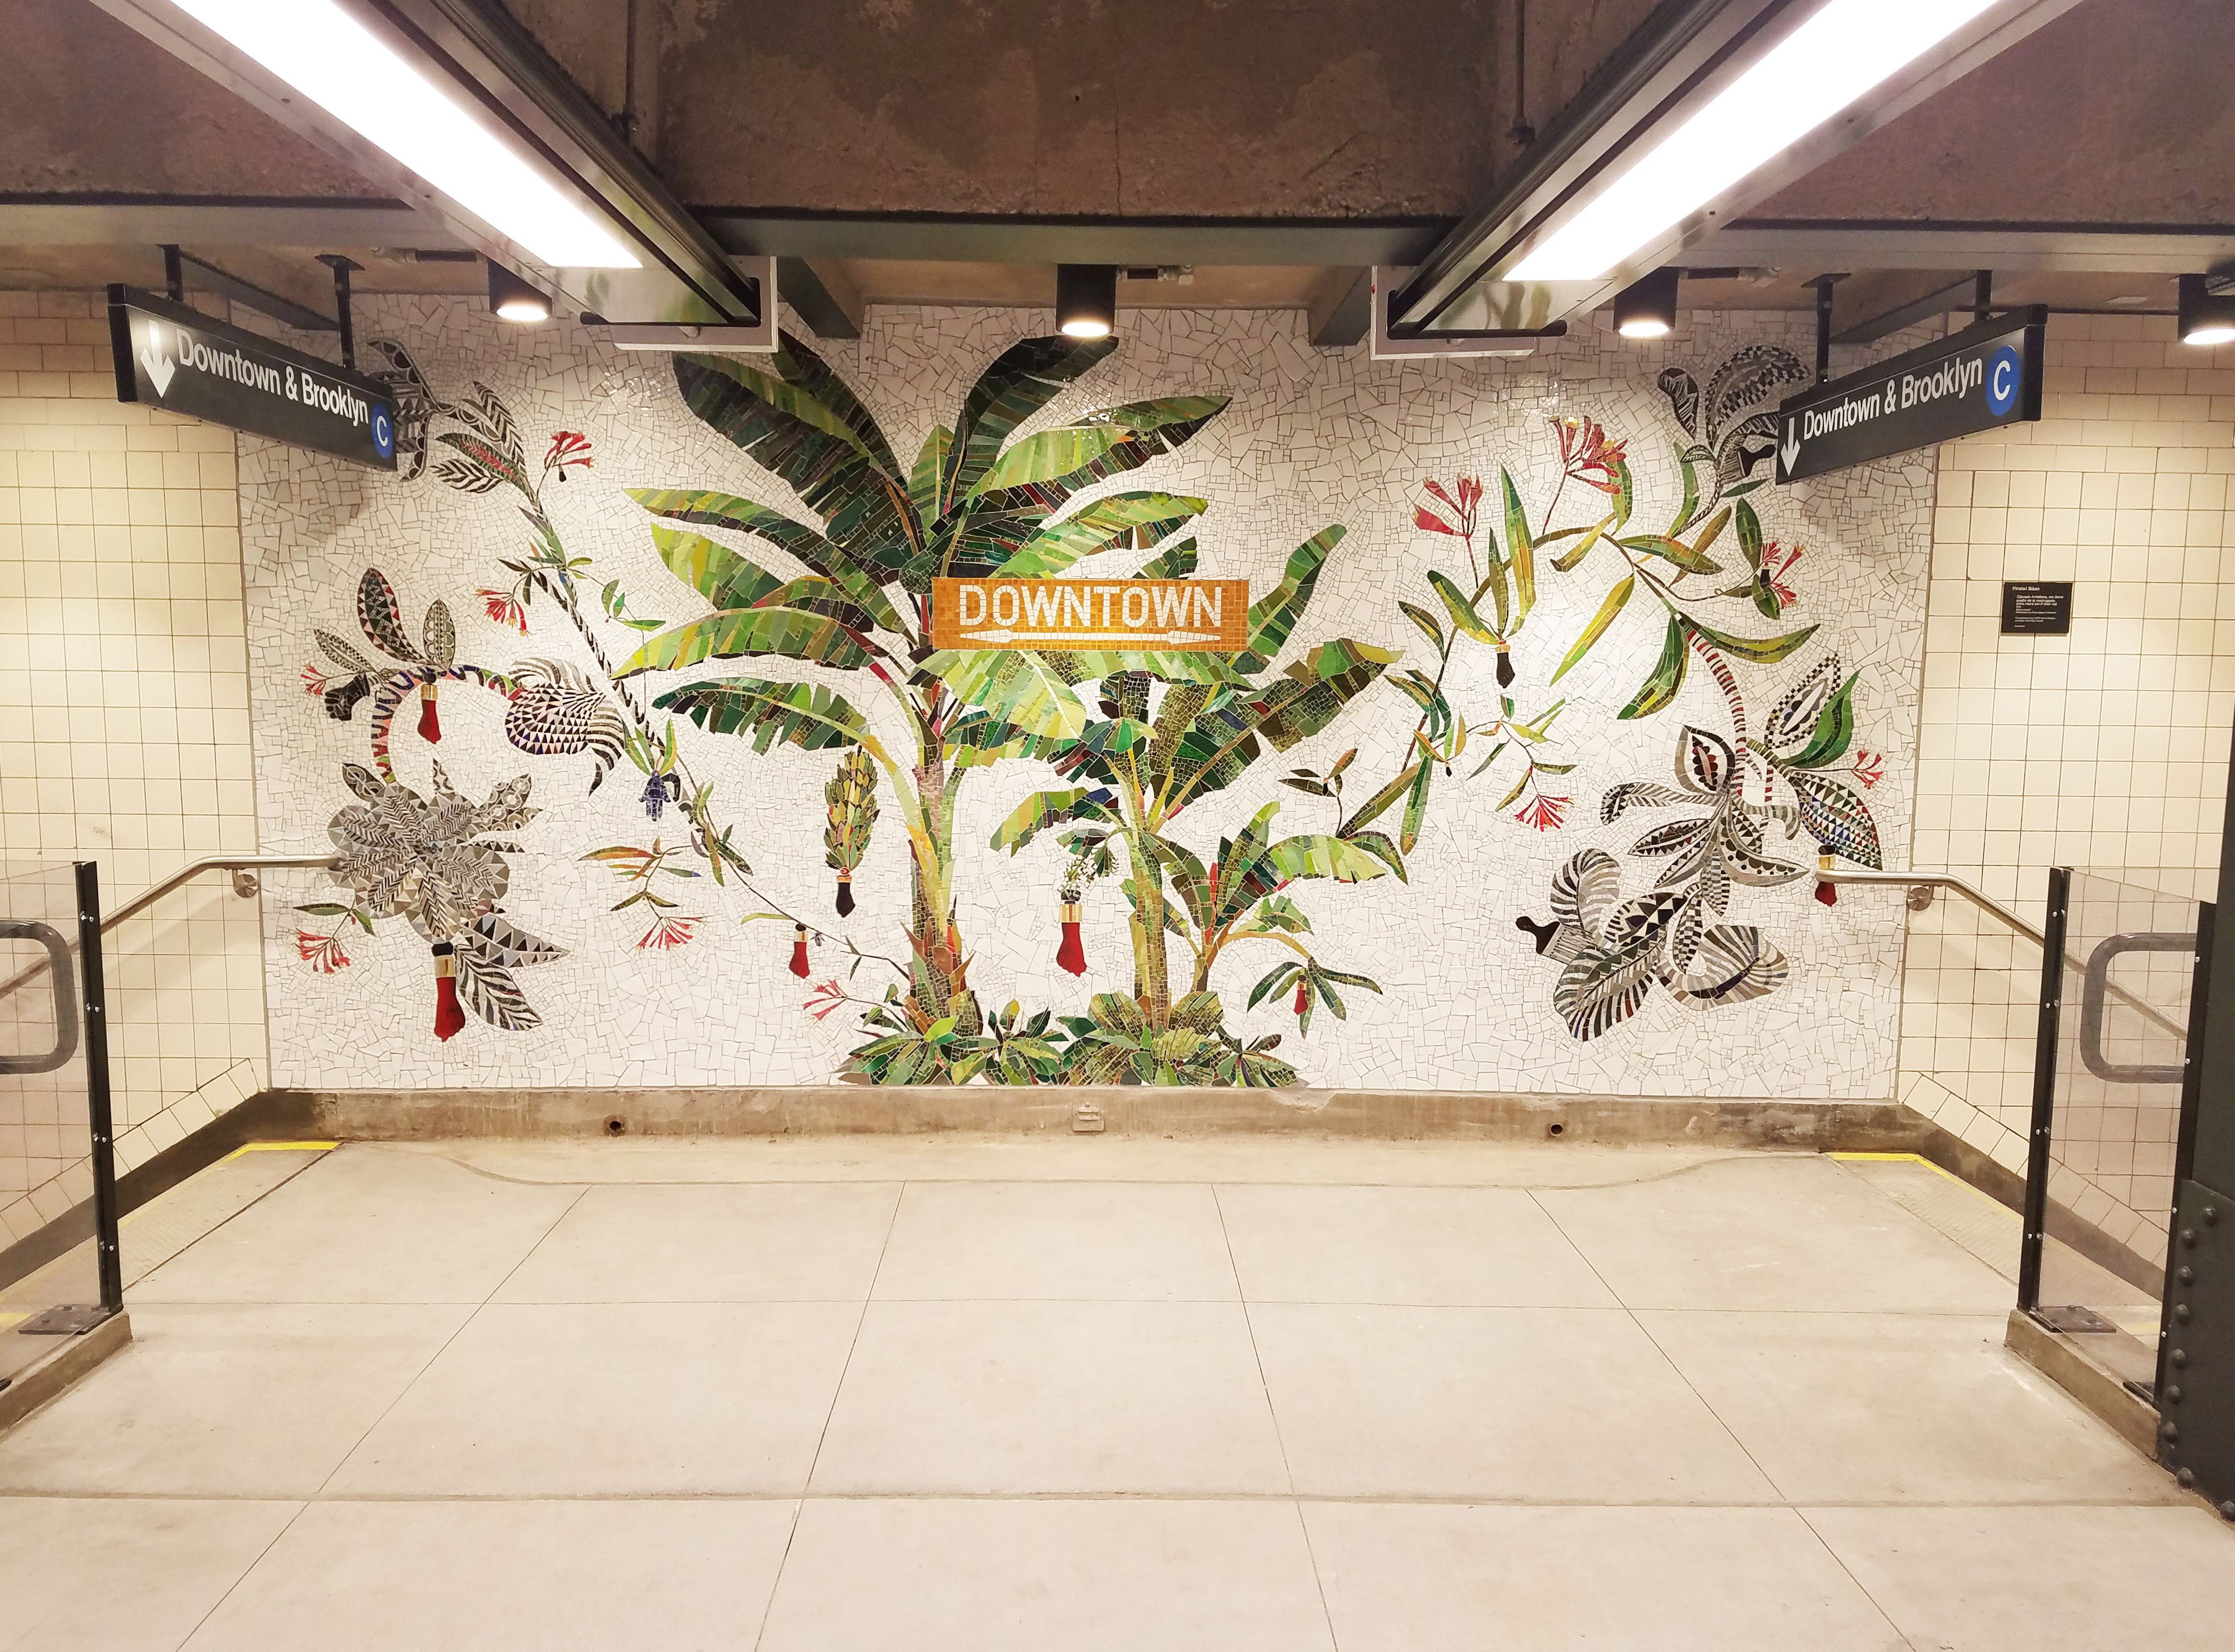 Subway station artwork on mosaic tile at station in downtown Manhattan